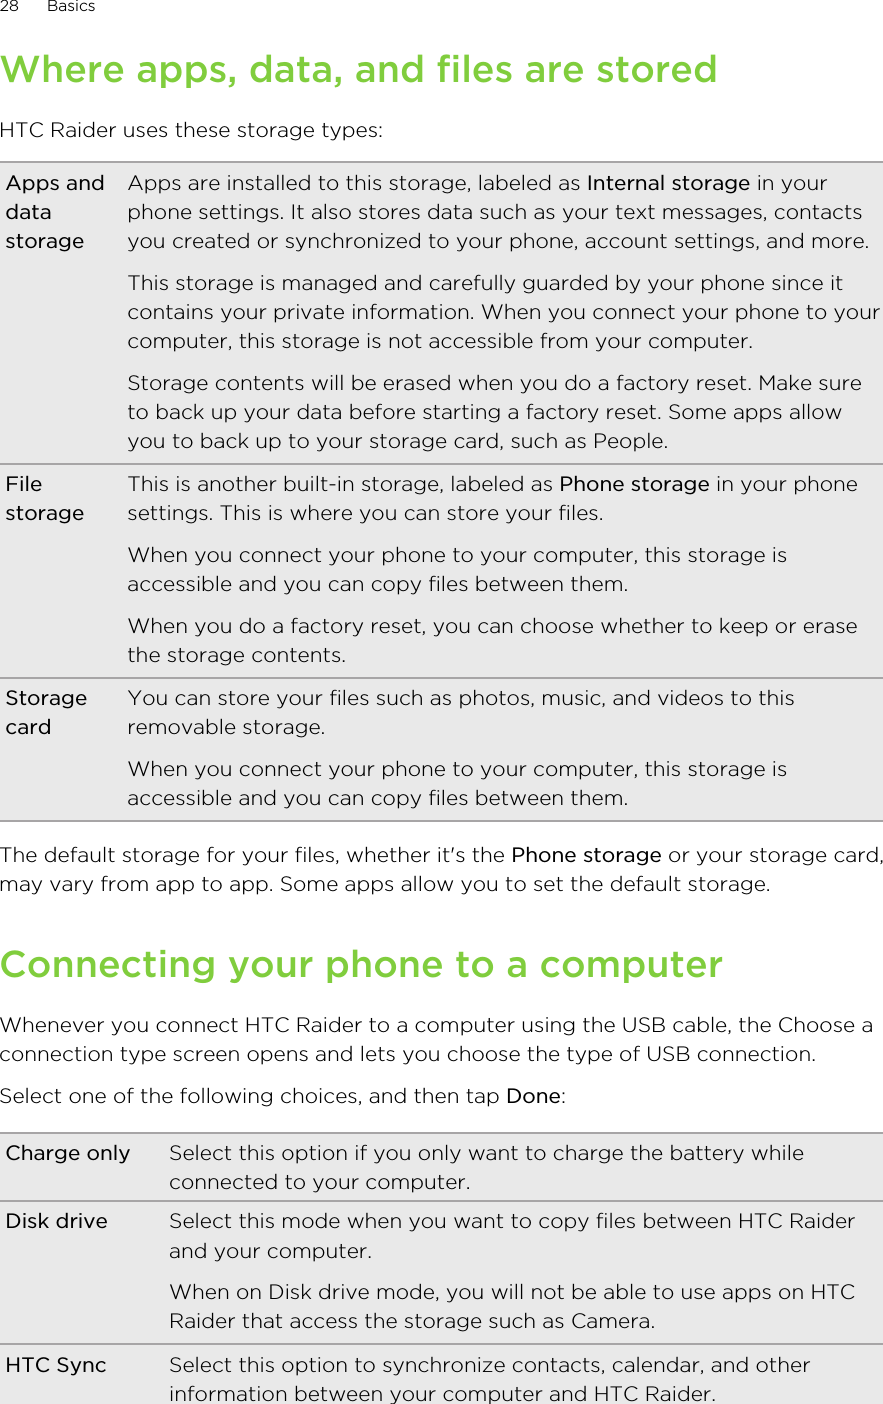 Where apps, data, and files are storedHTC Raider uses these storage types:Apps anddatastorageApps are installed to this storage, labeled as Internal storage in yourphone settings. It also stores data such as your text messages, contactsyou created or synchronized to your phone, account settings, and more.This storage is managed and carefully guarded by your phone since itcontains your private information. When you connect your phone to yourcomputer, this storage is not accessible from your computer.Storage contents will be erased when you do a factory reset. Make sureto back up your data before starting a factory reset. Some apps allowyou to back up to your storage card, such as People.FilestorageThis is another built-in storage, labeled as Phone storage in your phonesettings. This is where you can store your files.When you connect your phone to your computer, this storage isaccessible and you can copy files between them.When you do a factory reset, you can choose whether to keep or erasethe storage contents.StoragecardYou can store your files such as photos, music, and videos to thisremovable storage.When you connect your phone to your computer, this storage isaccessible and you can copy files between them.The default storage for your files, whether it&apos;s the Phone storage or your storage card,may vary from app to app. Some apps allow you to set the default storage.Connecting your phone to a computerWhenever you connect HTC Raider to a computer using the USB cable, the Choose aconnection type screen opens and lets you choose the type of USB connection.Select one of the following choices, and then tap Done:Charge only Select this option if you only want to charge the battery whileconnected to your computer.Disk drive Select this mode when you want to copy files between HTC Raiderand your computer.When on Disk drive mode, you will not be able to use apps on HTCRaider that access the storage such as Camera.HTC Sync Select this option to synchronize contacts, calendar, and otherinformation between your computer and HTC Raider.28 Basics